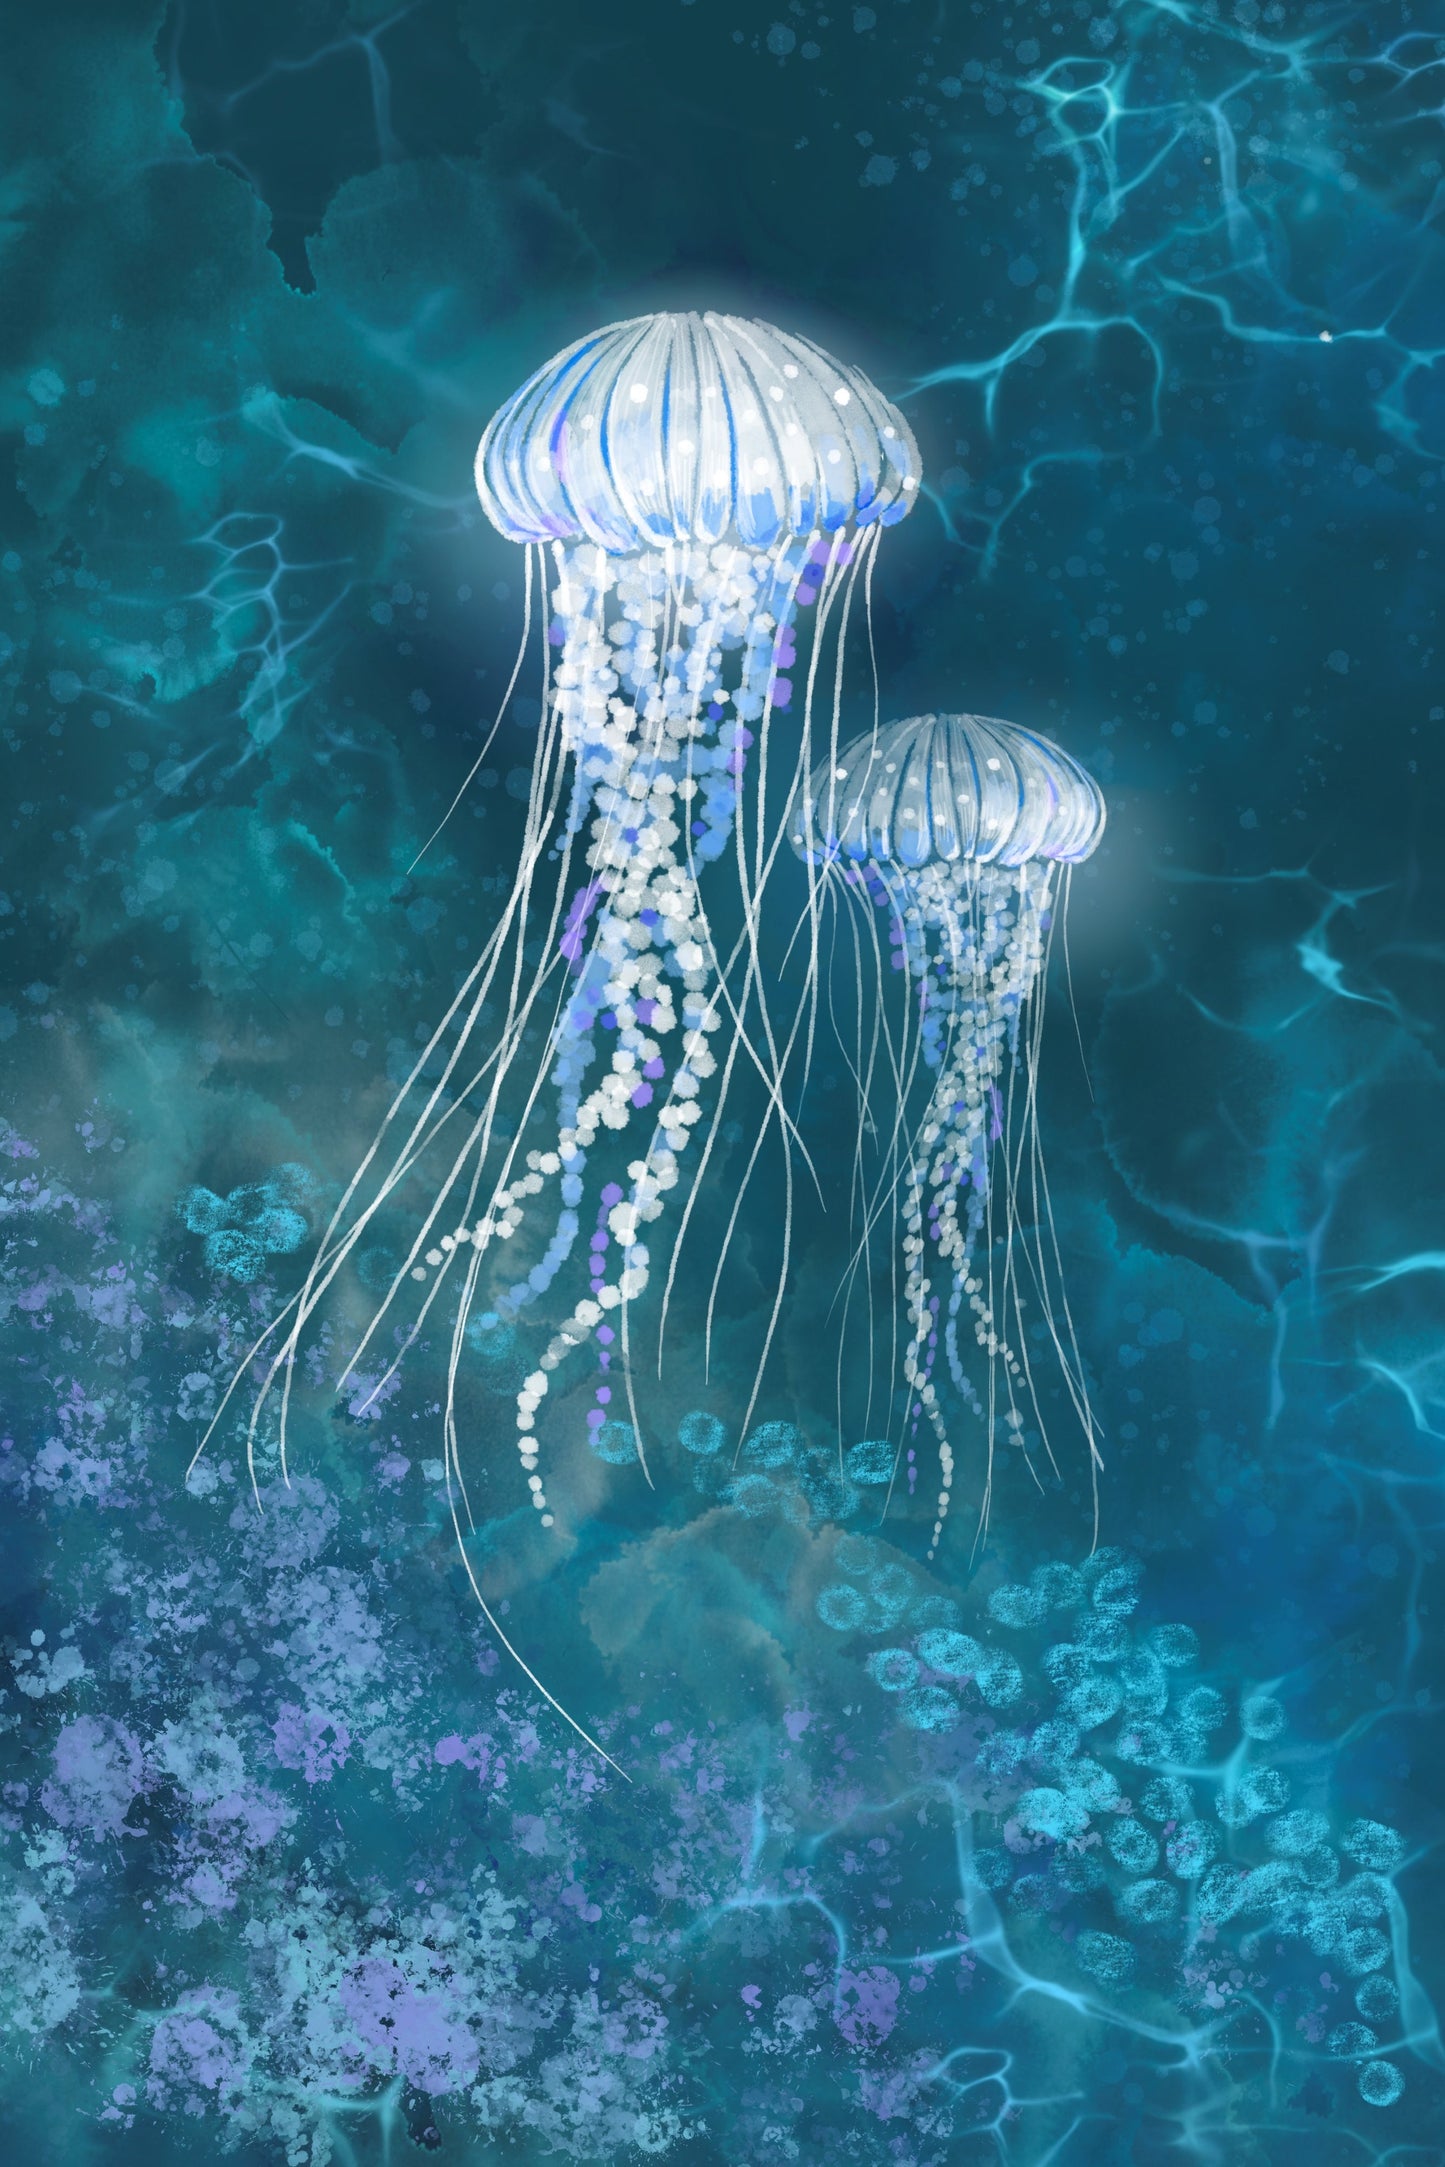 Jellies of the Sea - Illustrated Print by Thomas Little